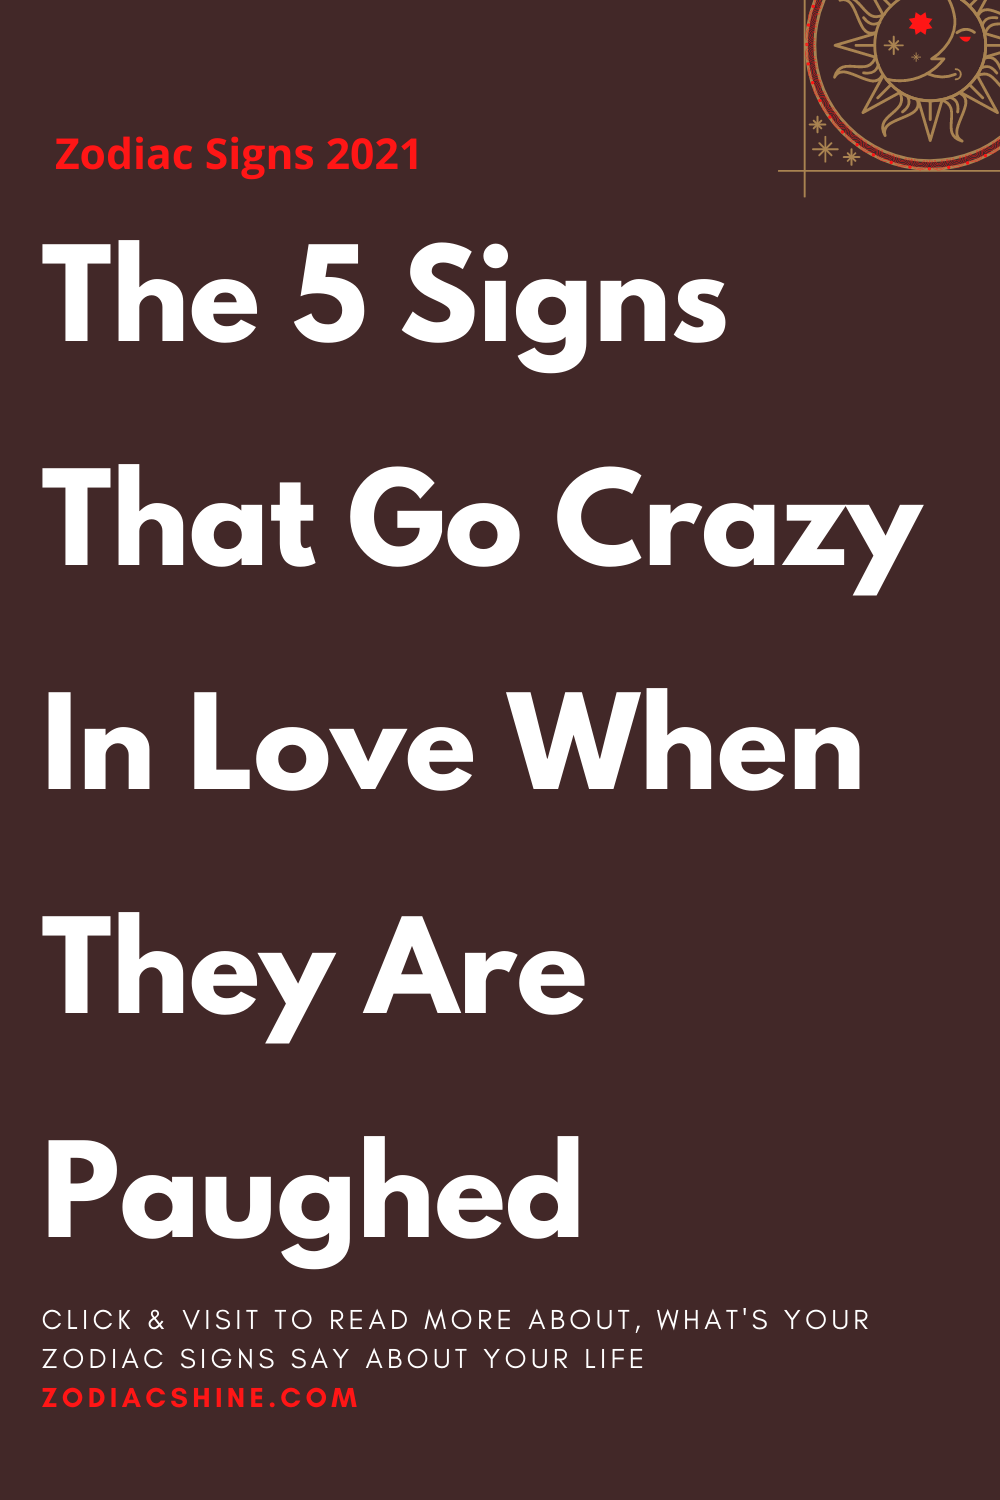 The 5 Signs That Go Crazy In Love When They Are Paughed